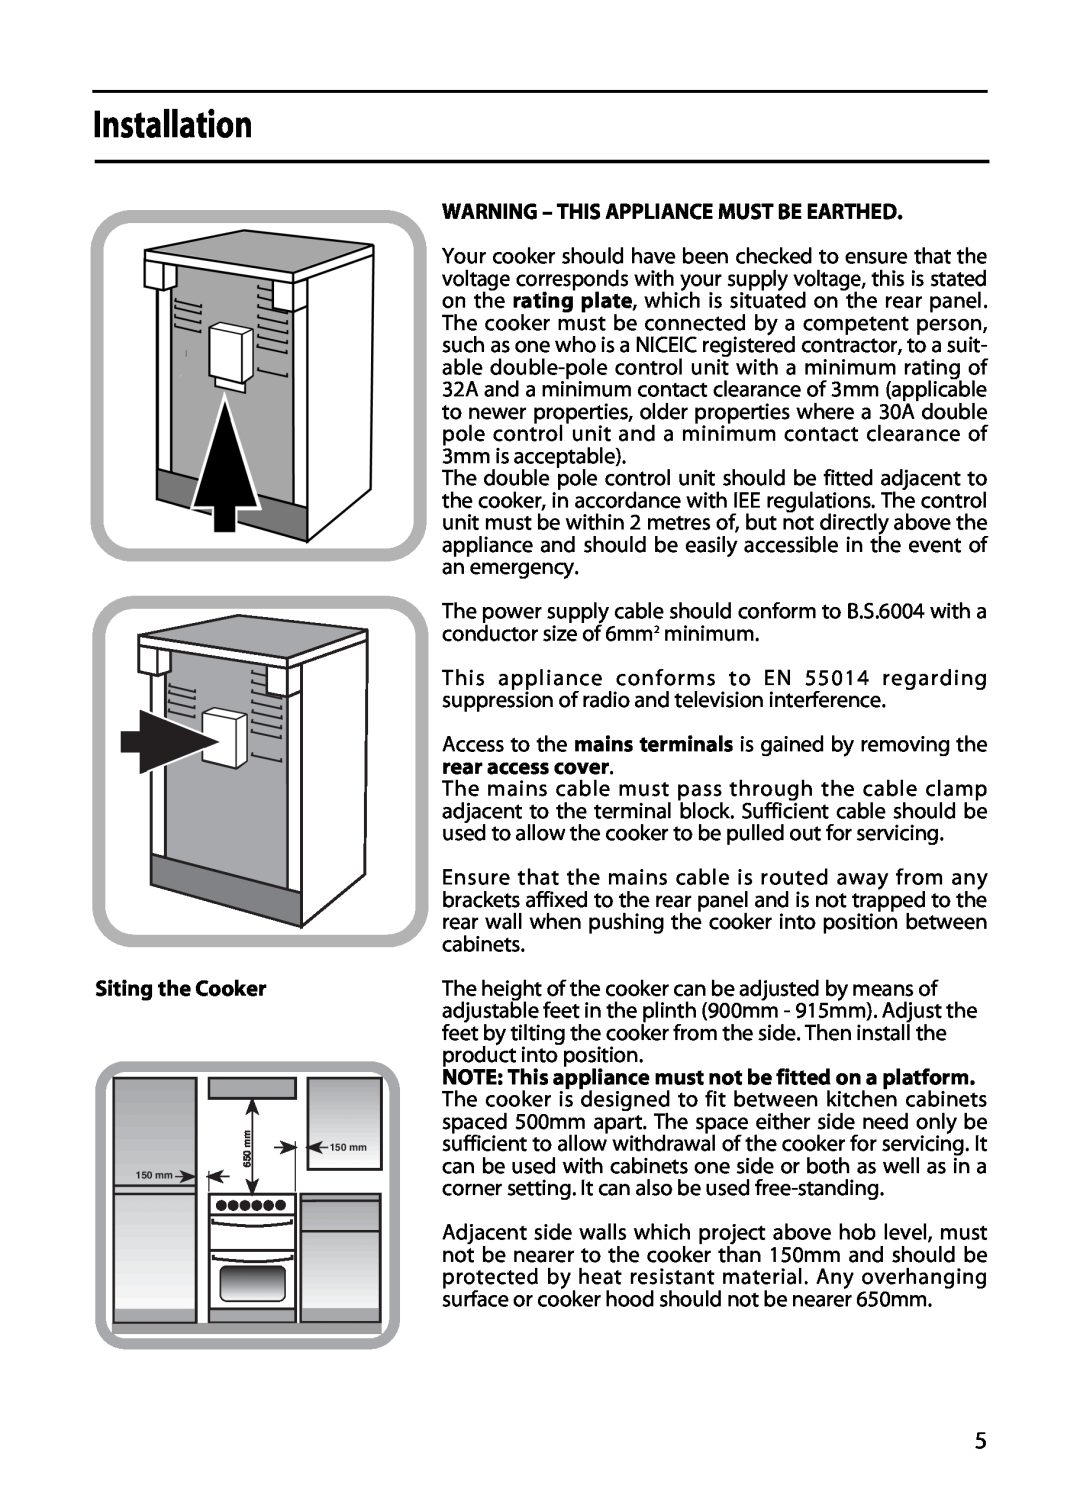 Hotpoint 5TCC manual Installation, Siting the Cooker, Warning - This Appliance Must Be Earthed 